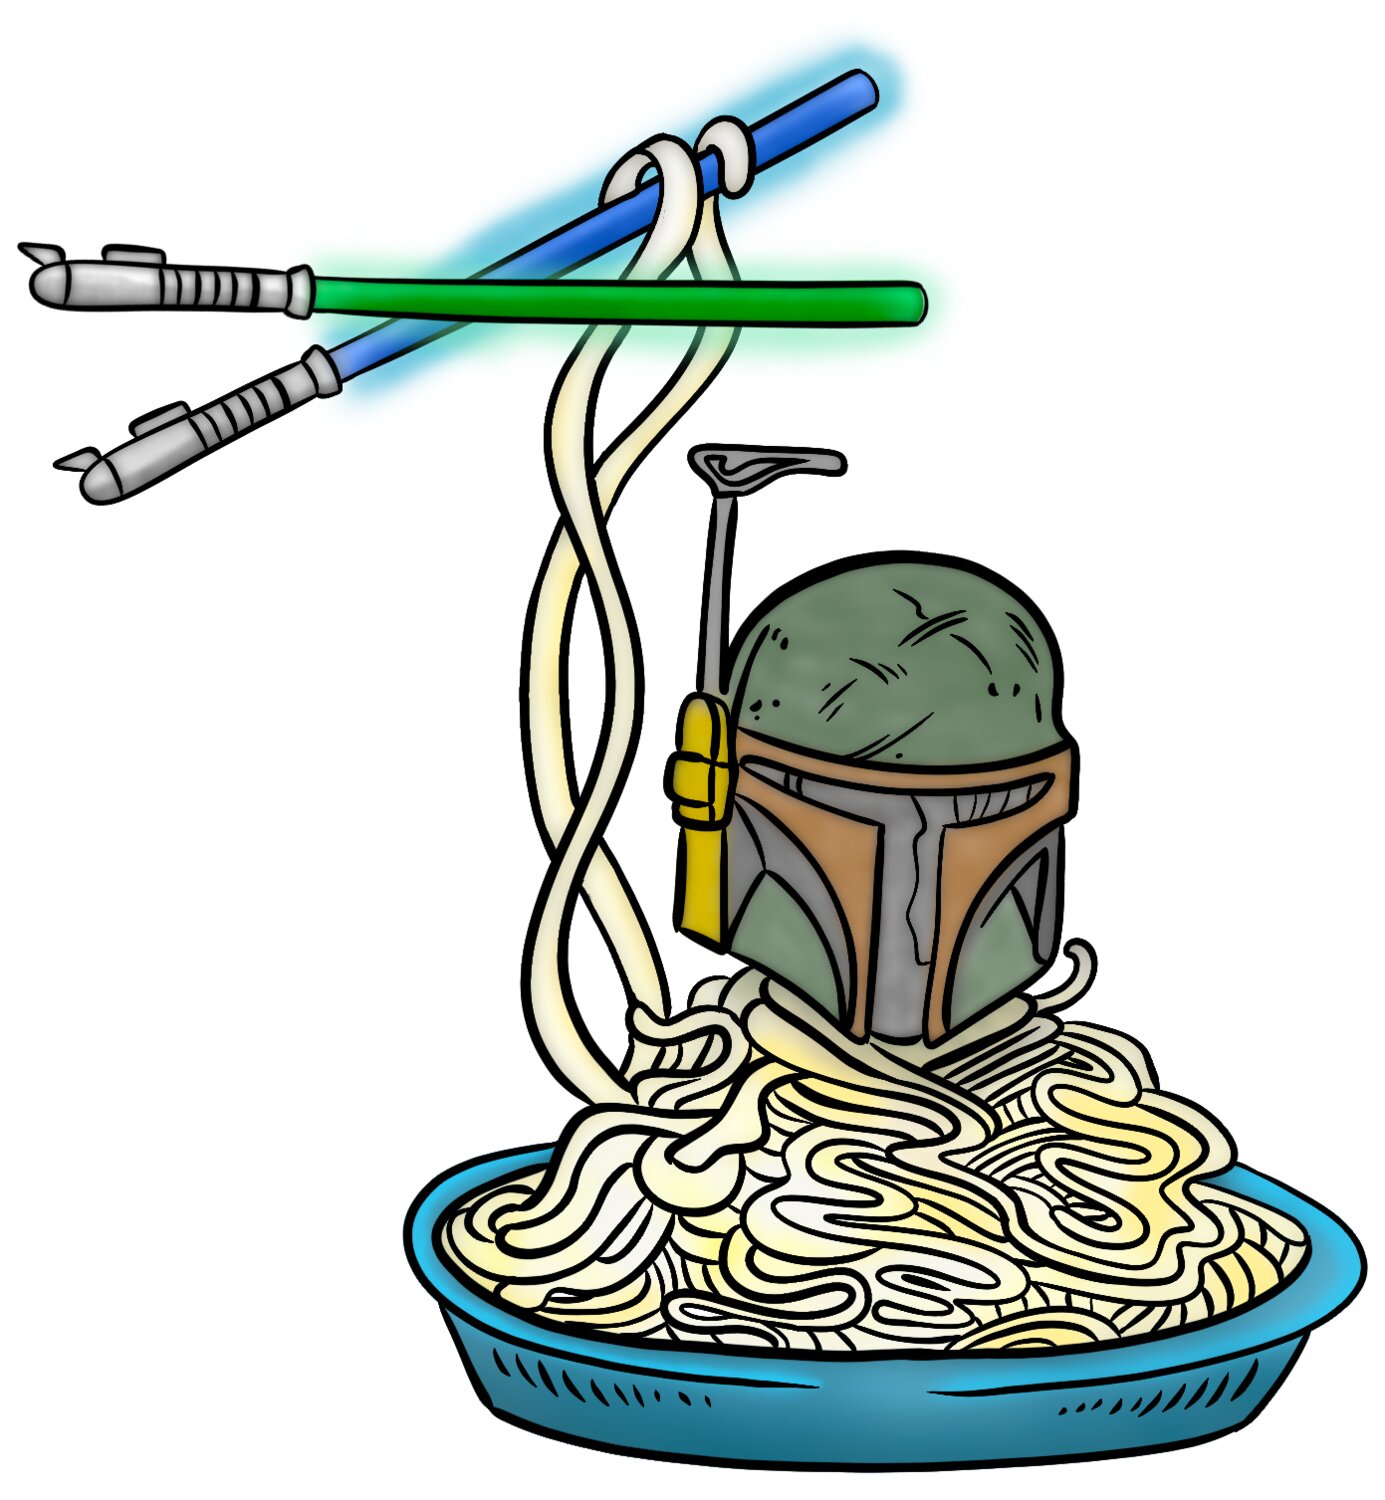 “More cheese? As you wish.”
- Boba Fettuccine, probably.